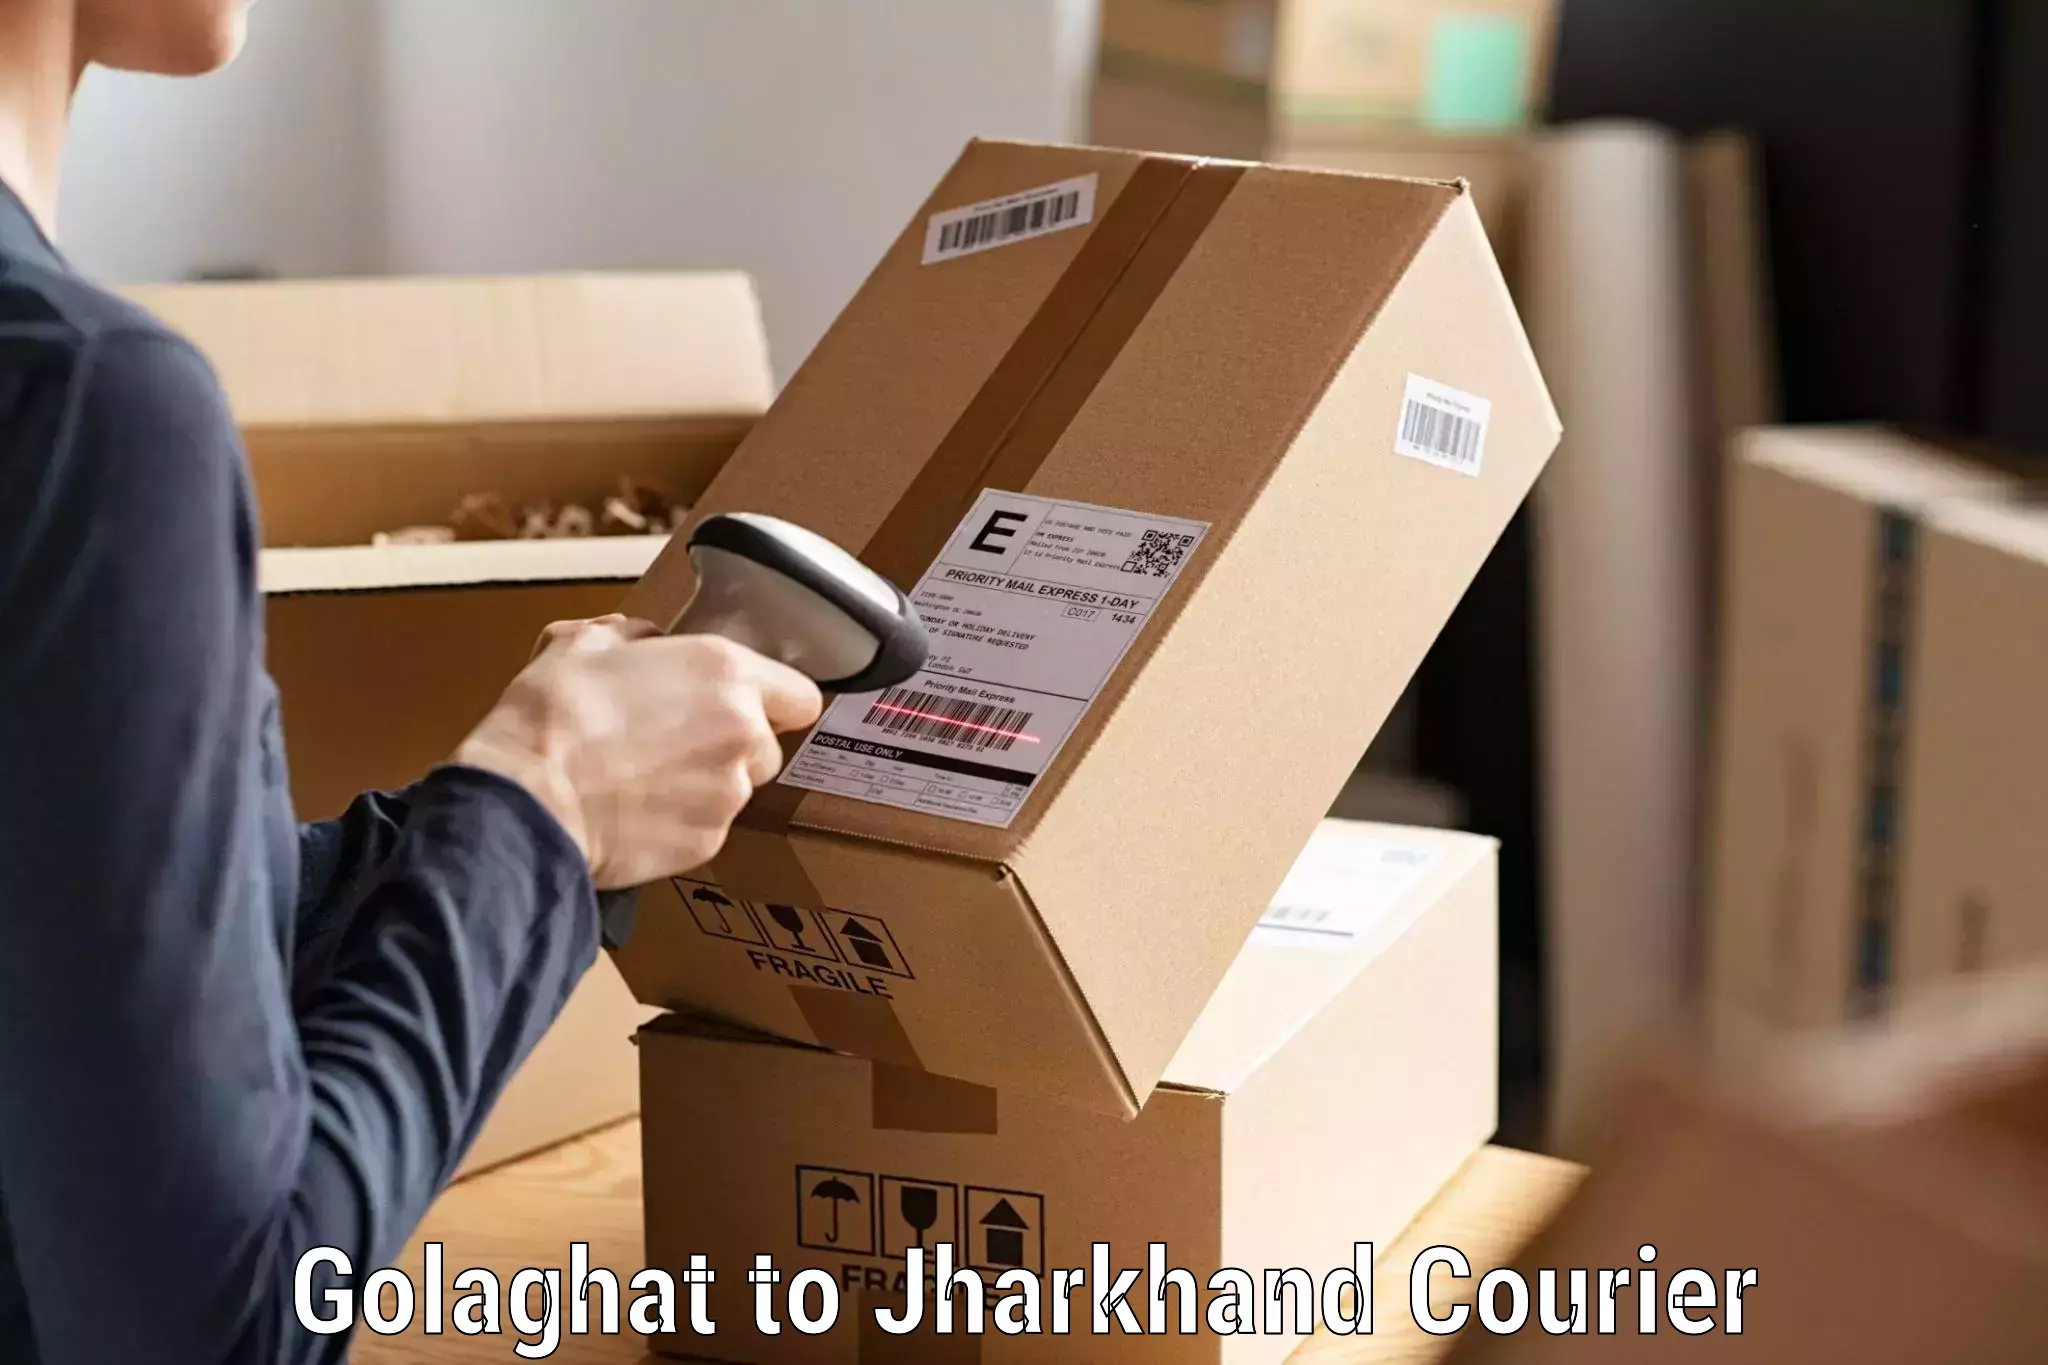 Advanced parcel tracking Golaghat to Godabar Chatra